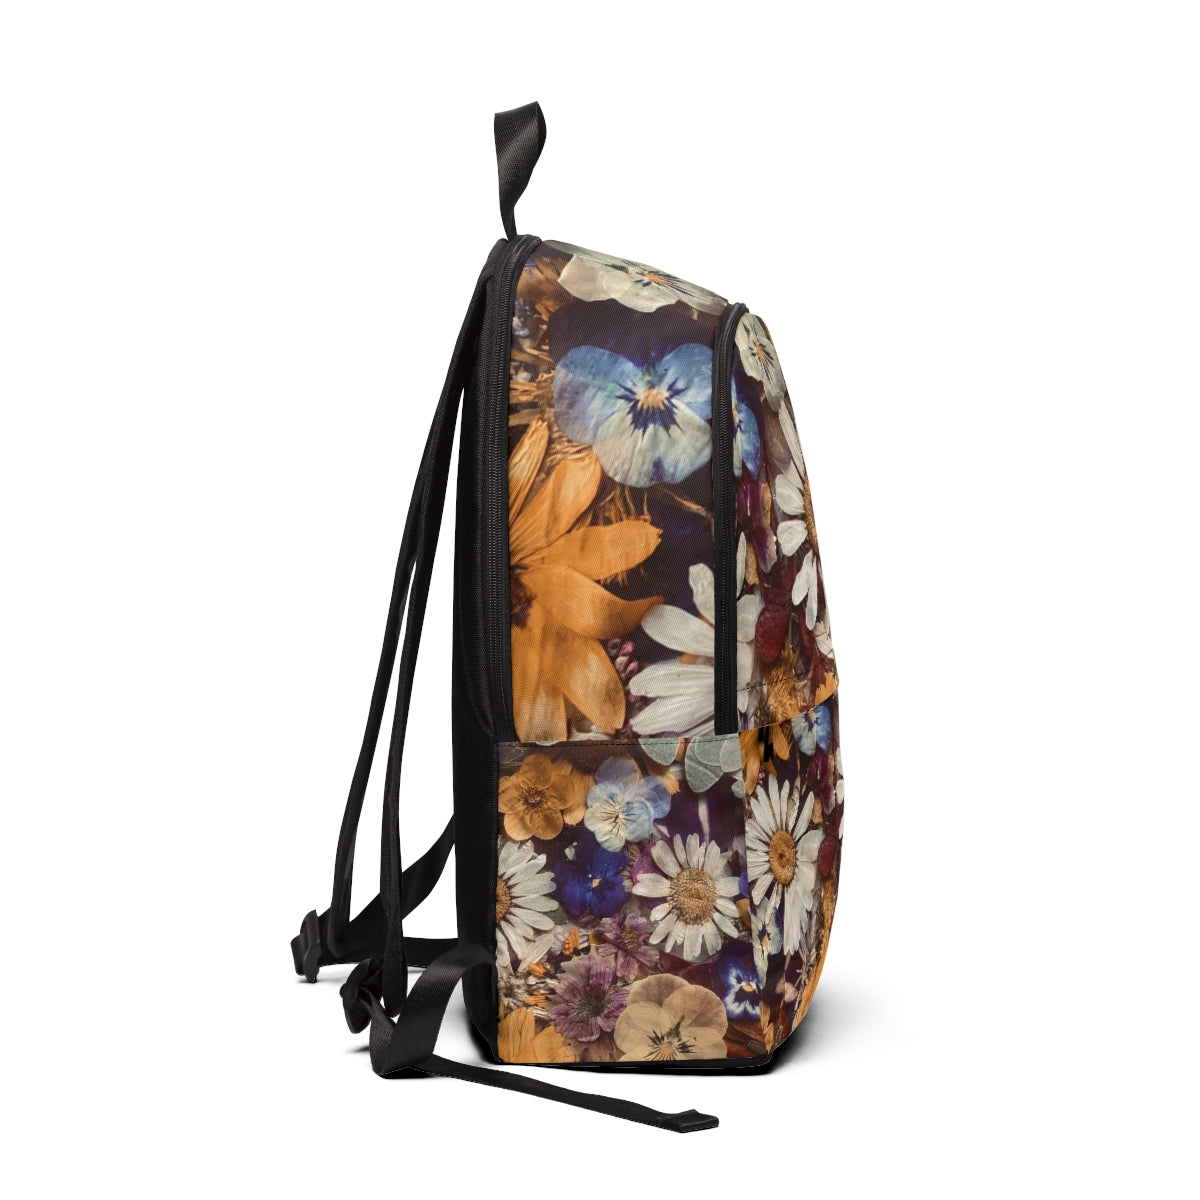 Pressed Flower Fabric Backpack